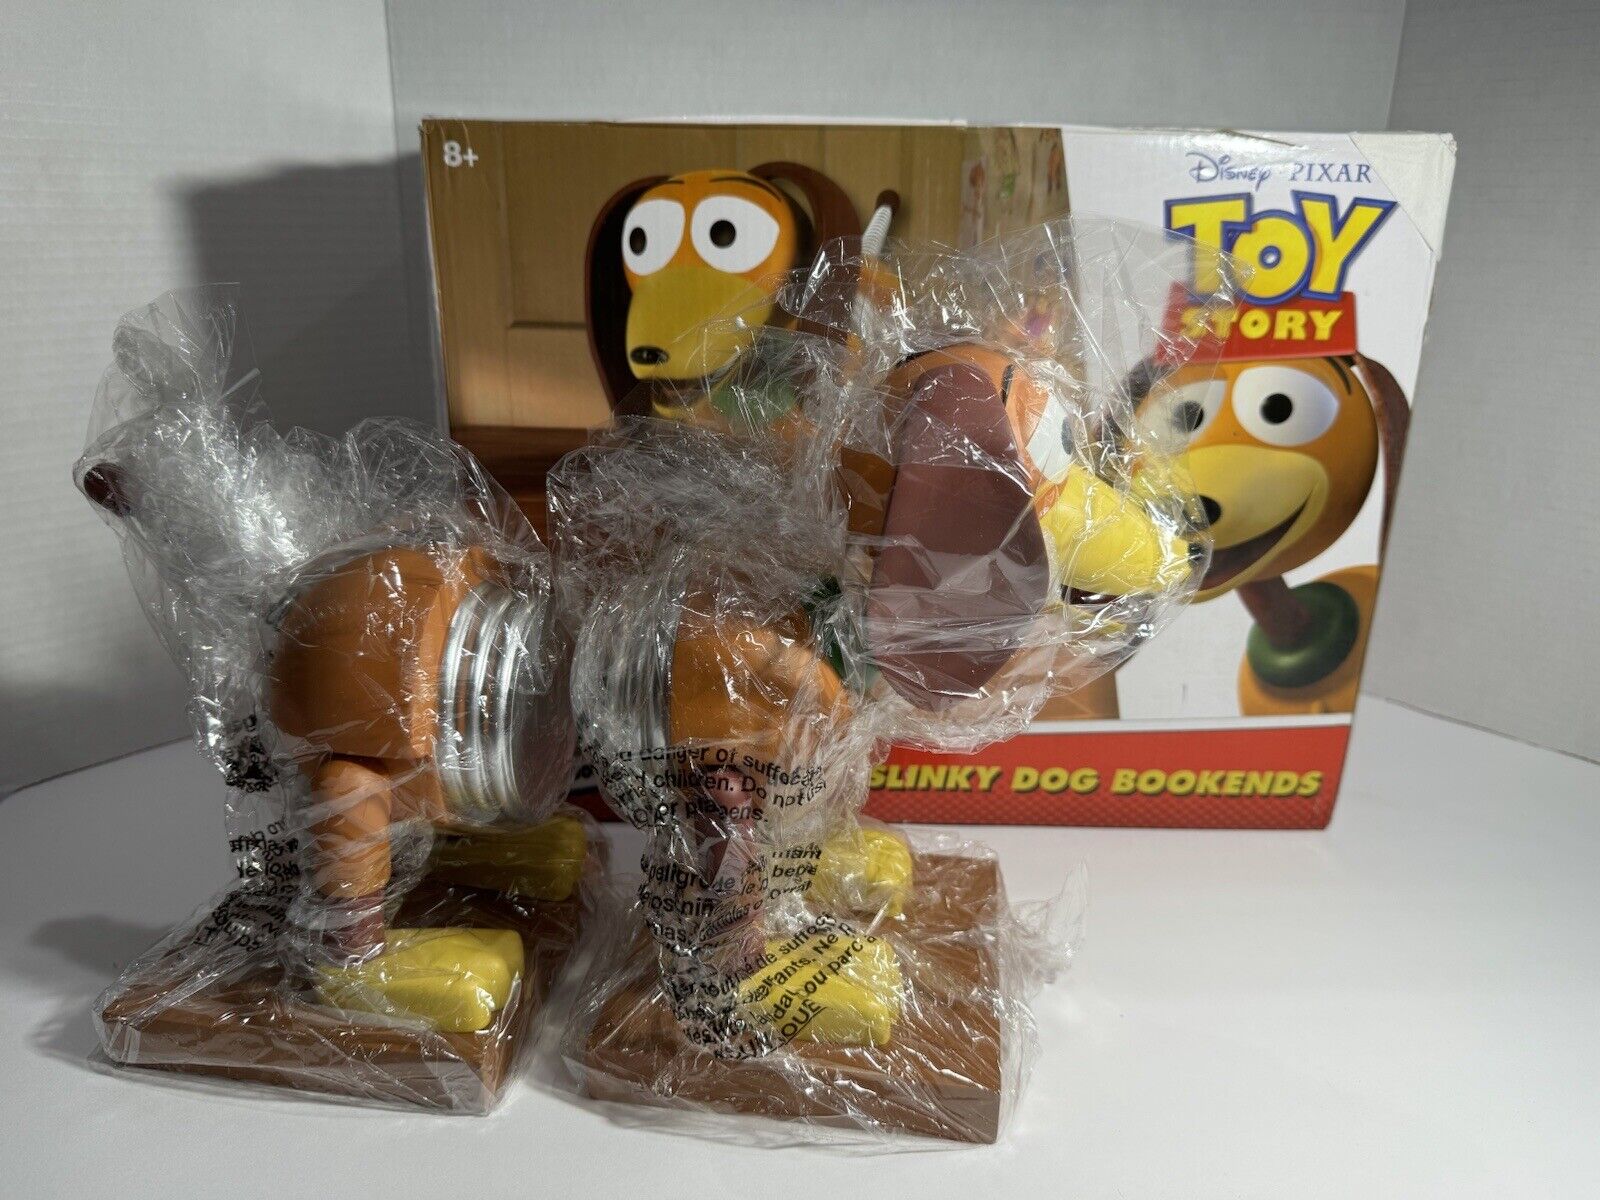 Toy Story Slinky Dog Bookends Box Lunch Disney Pixar Rare Sold Out New Open Box